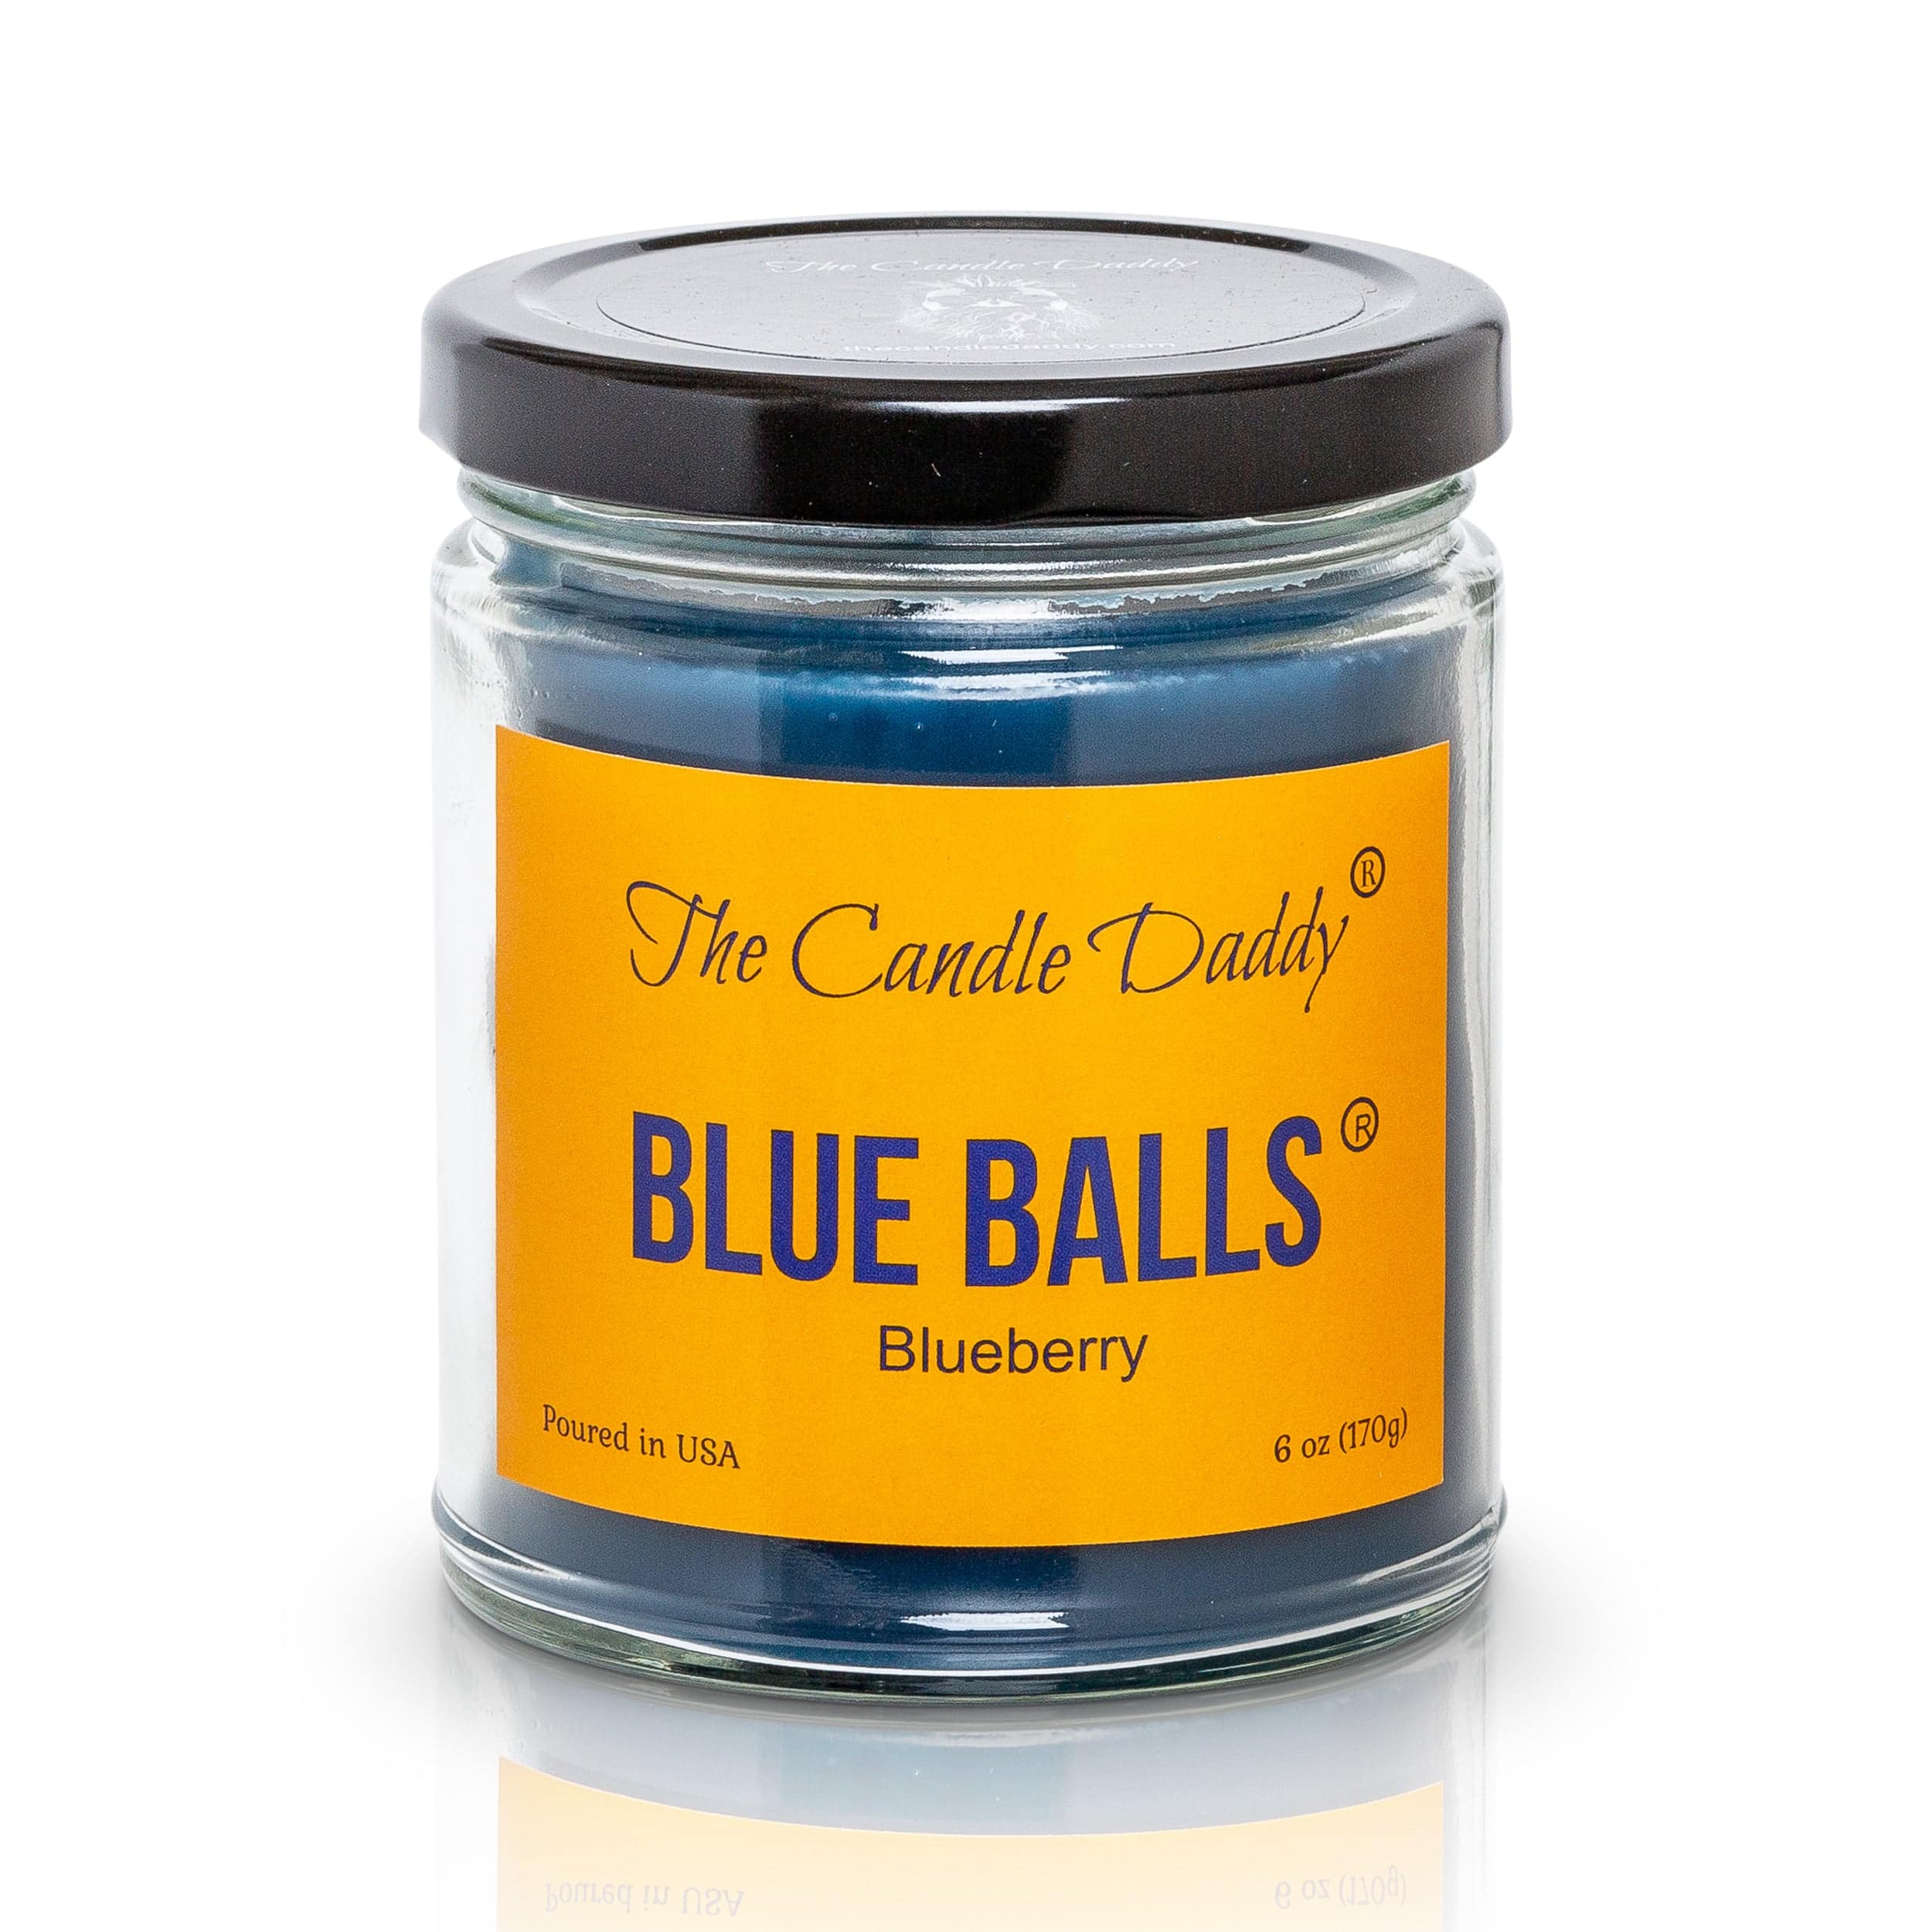 Blue Balls - Blueberry Scented Jar Candle- 6 Ounce - 40 Hour Burn Time